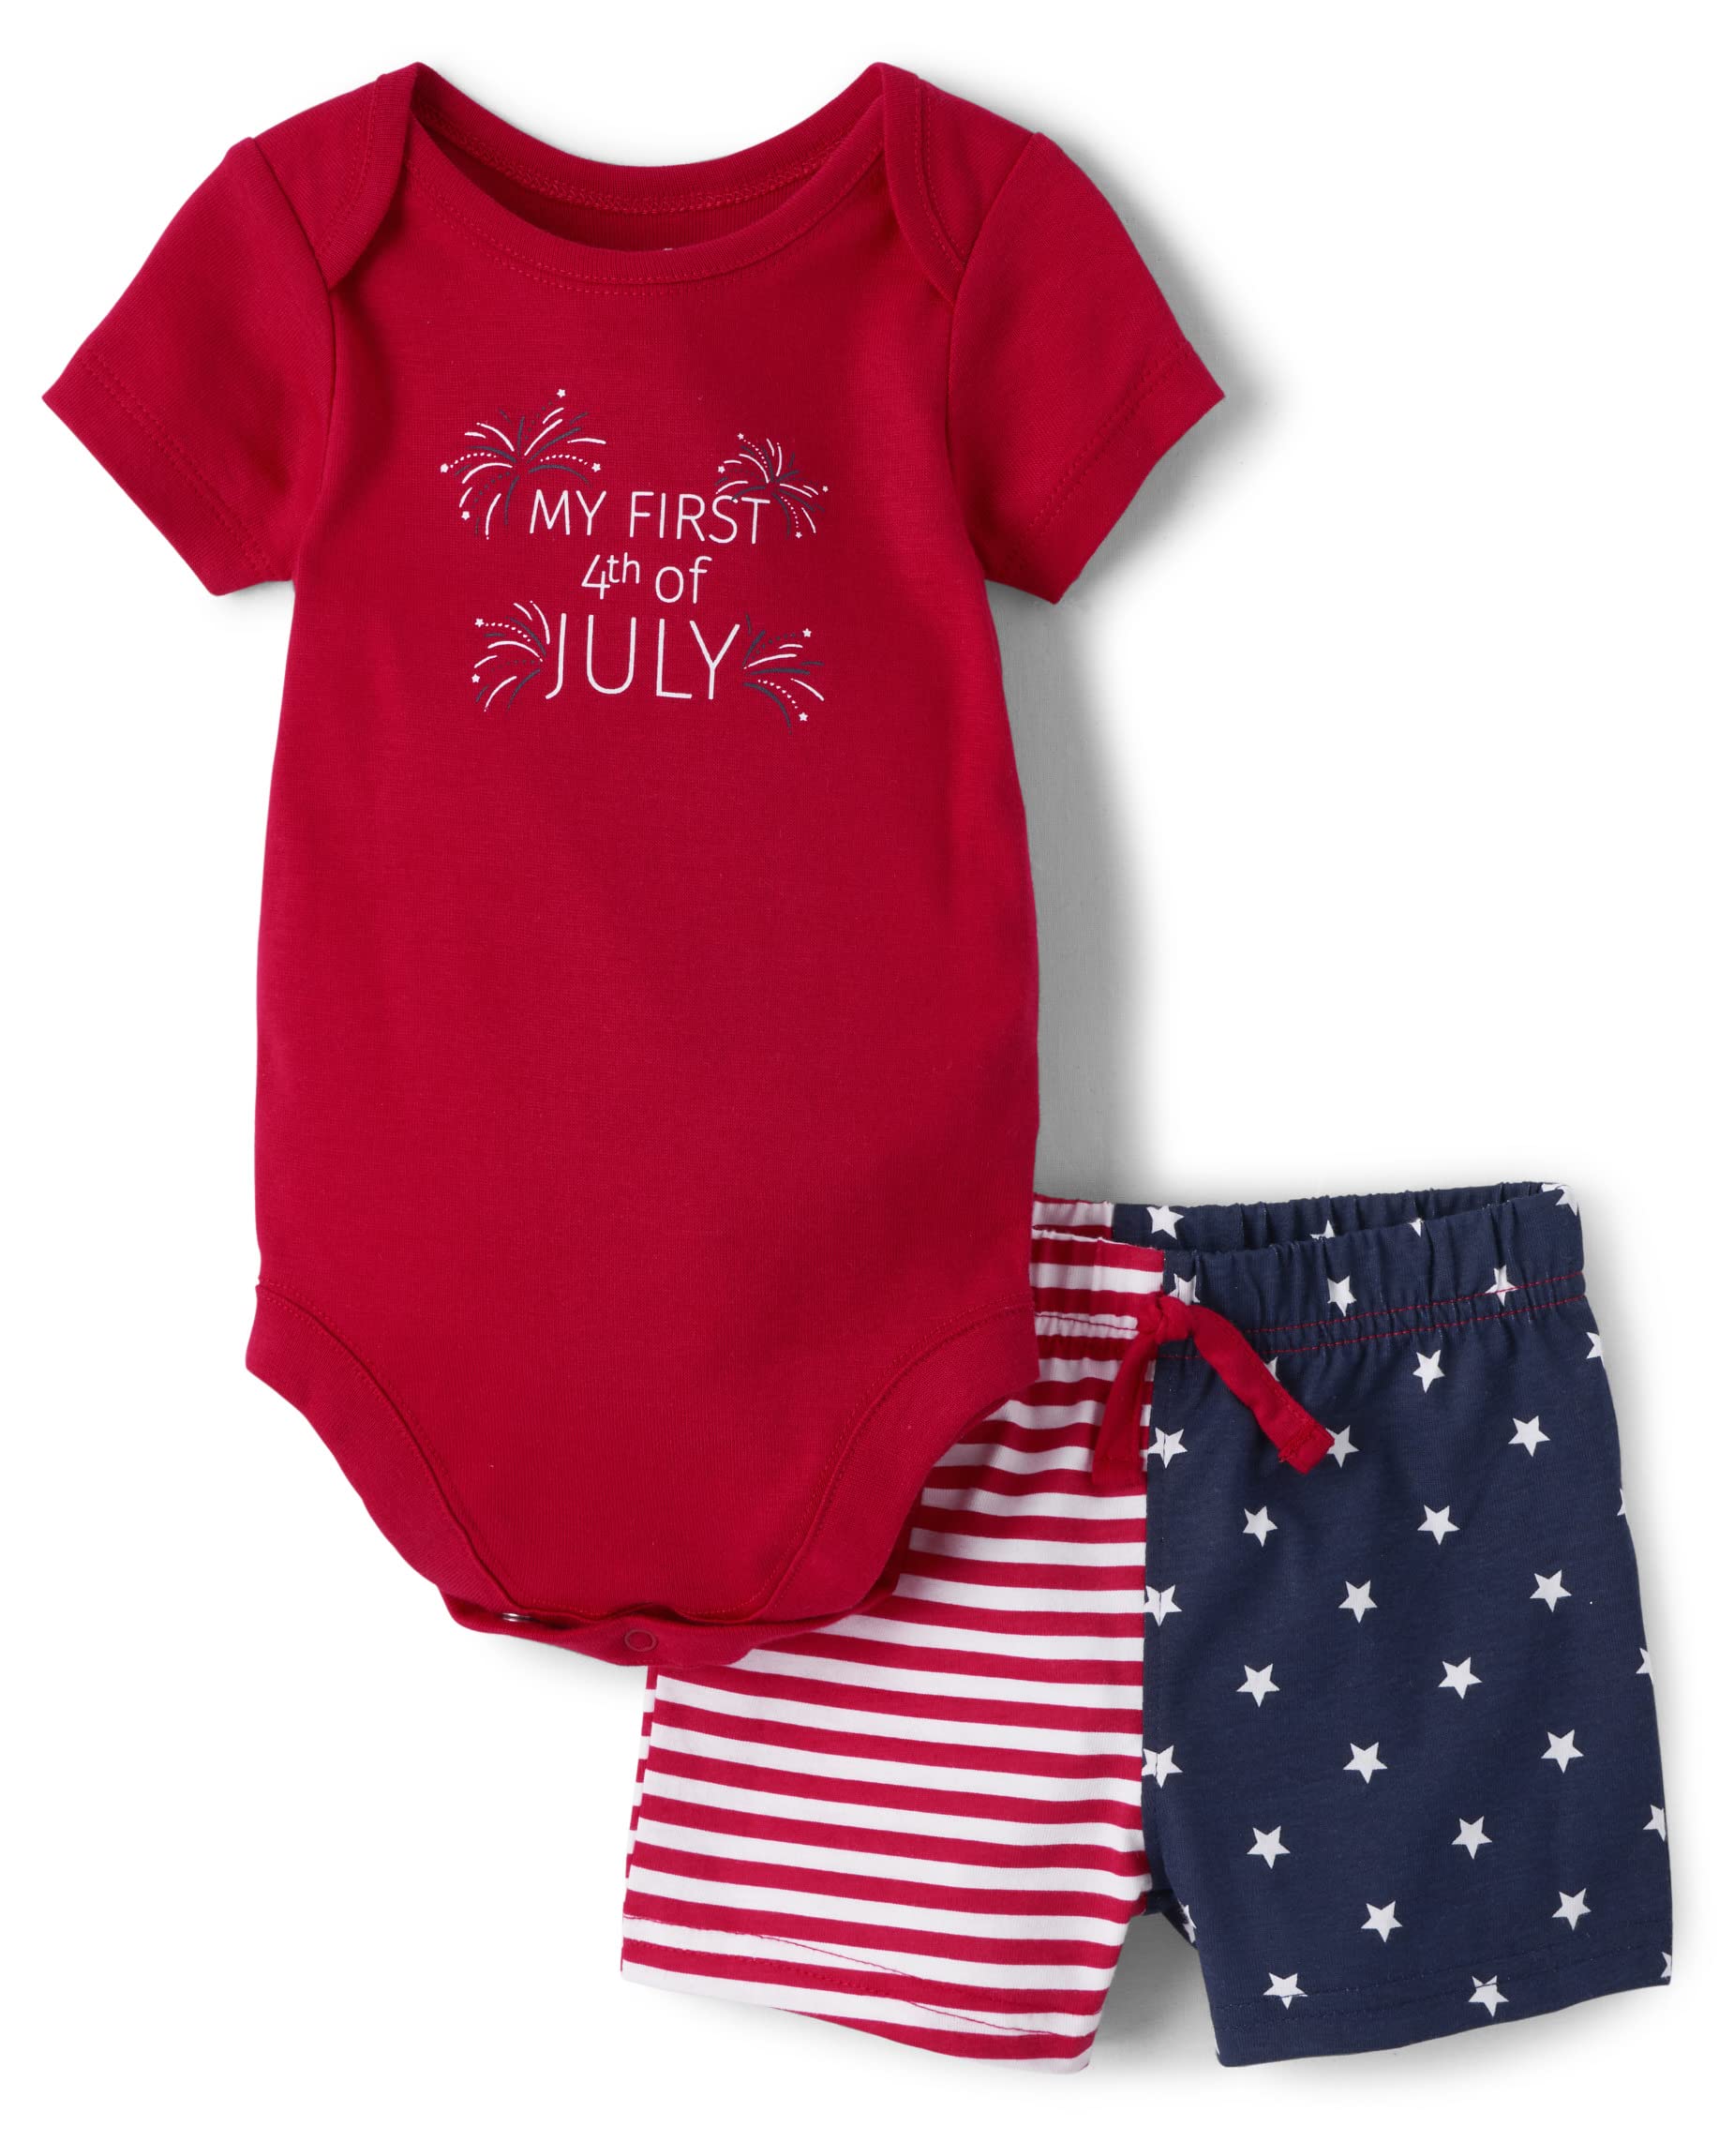 The Children's Place Baby Boys' Playwear Sets